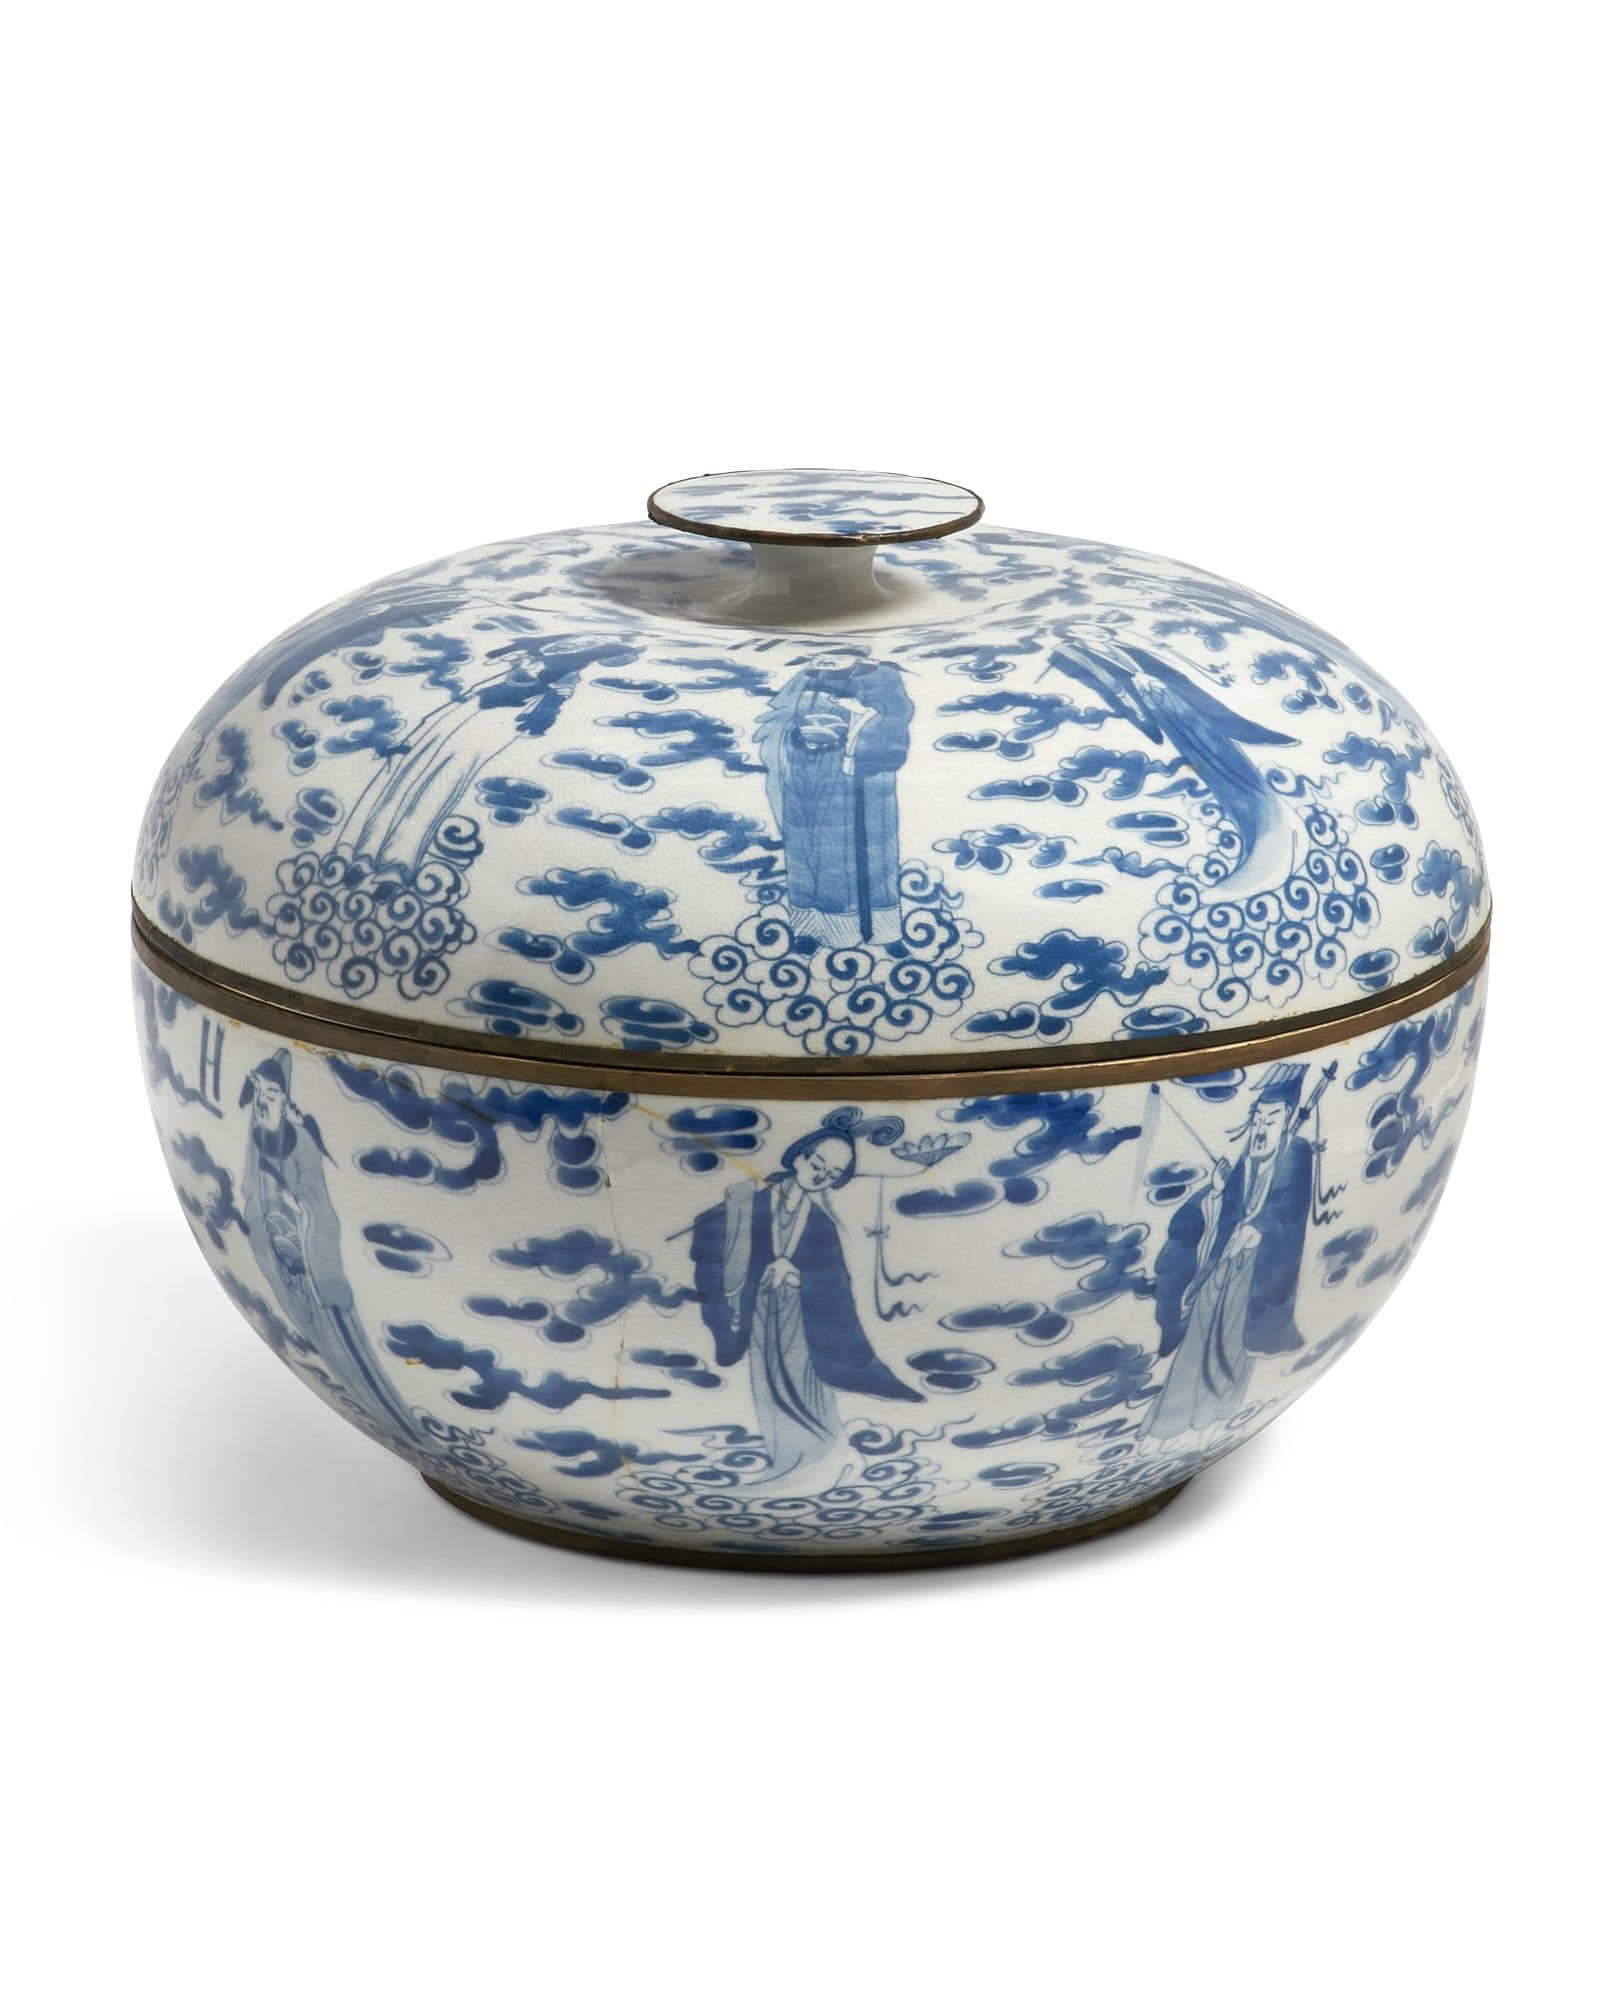 A LARGE CHINESE PORCELAIN COVERED